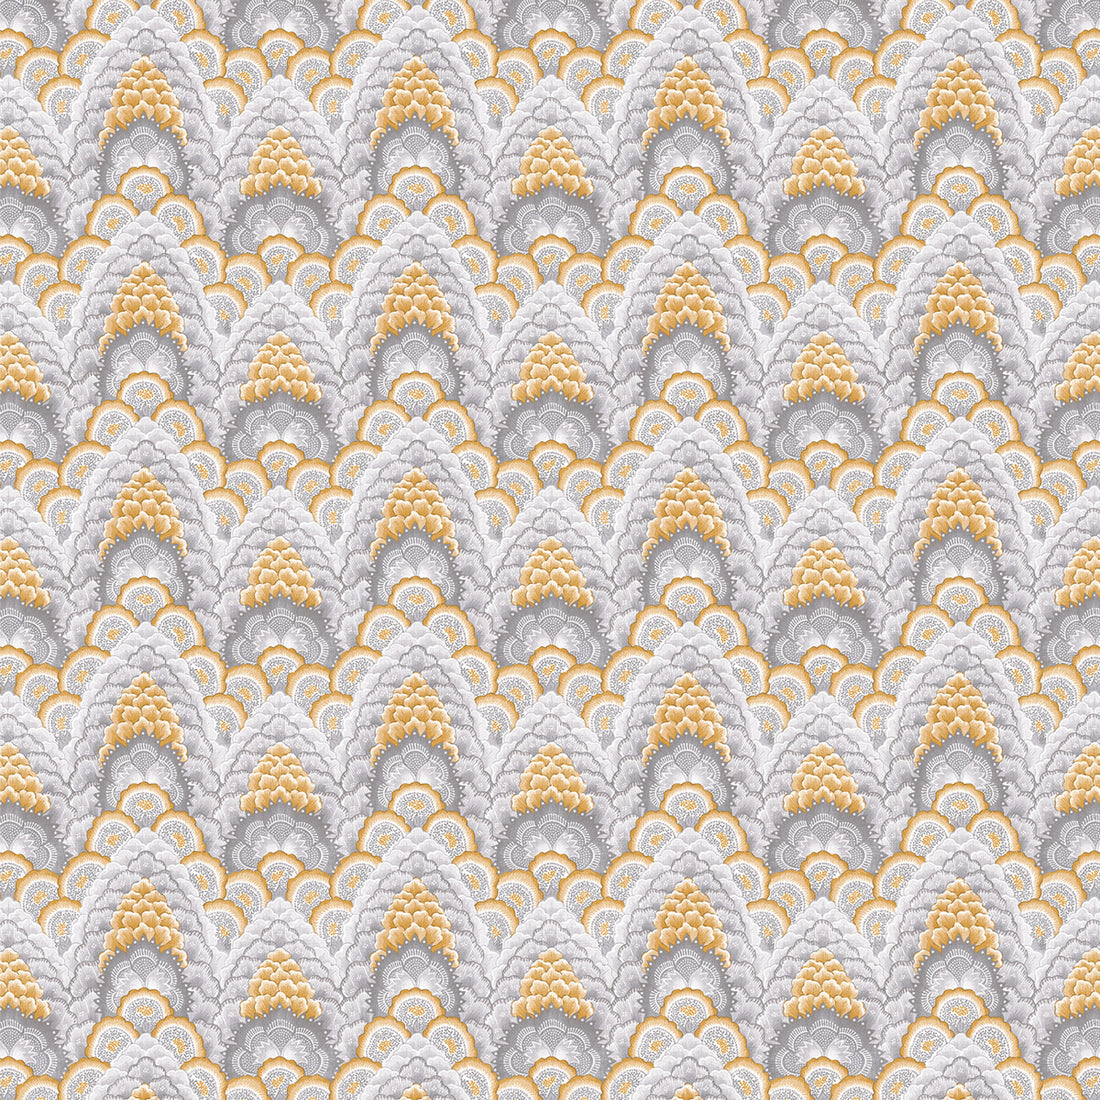 Ganges fabric in ocre color - pattern GDT5543.004.0 - by Gaston y Daniela in the Gaston Libreria collection